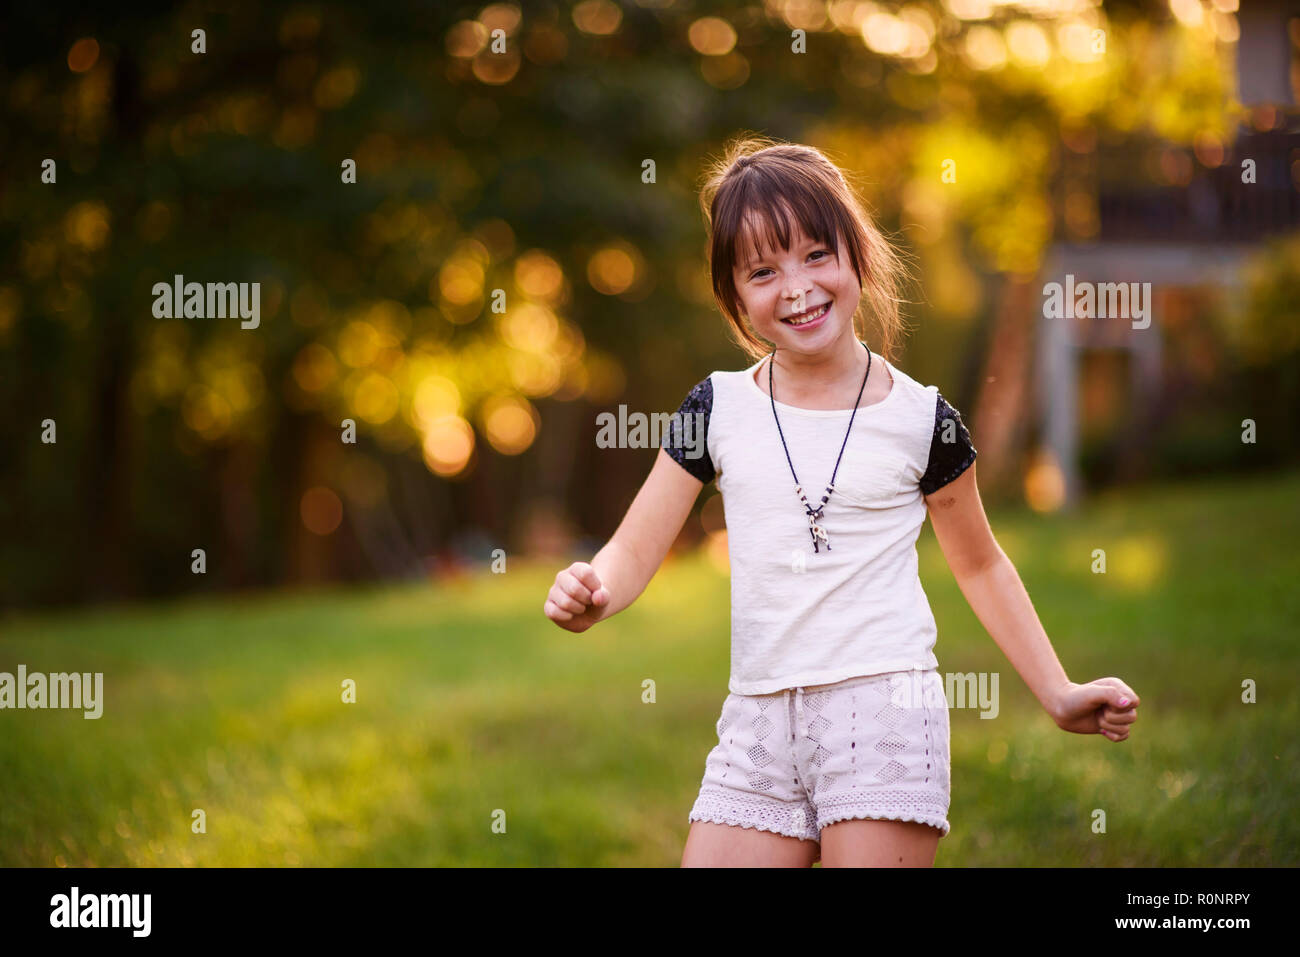 Portrait of a smiling Girl Dancing in the park Banque D'Images